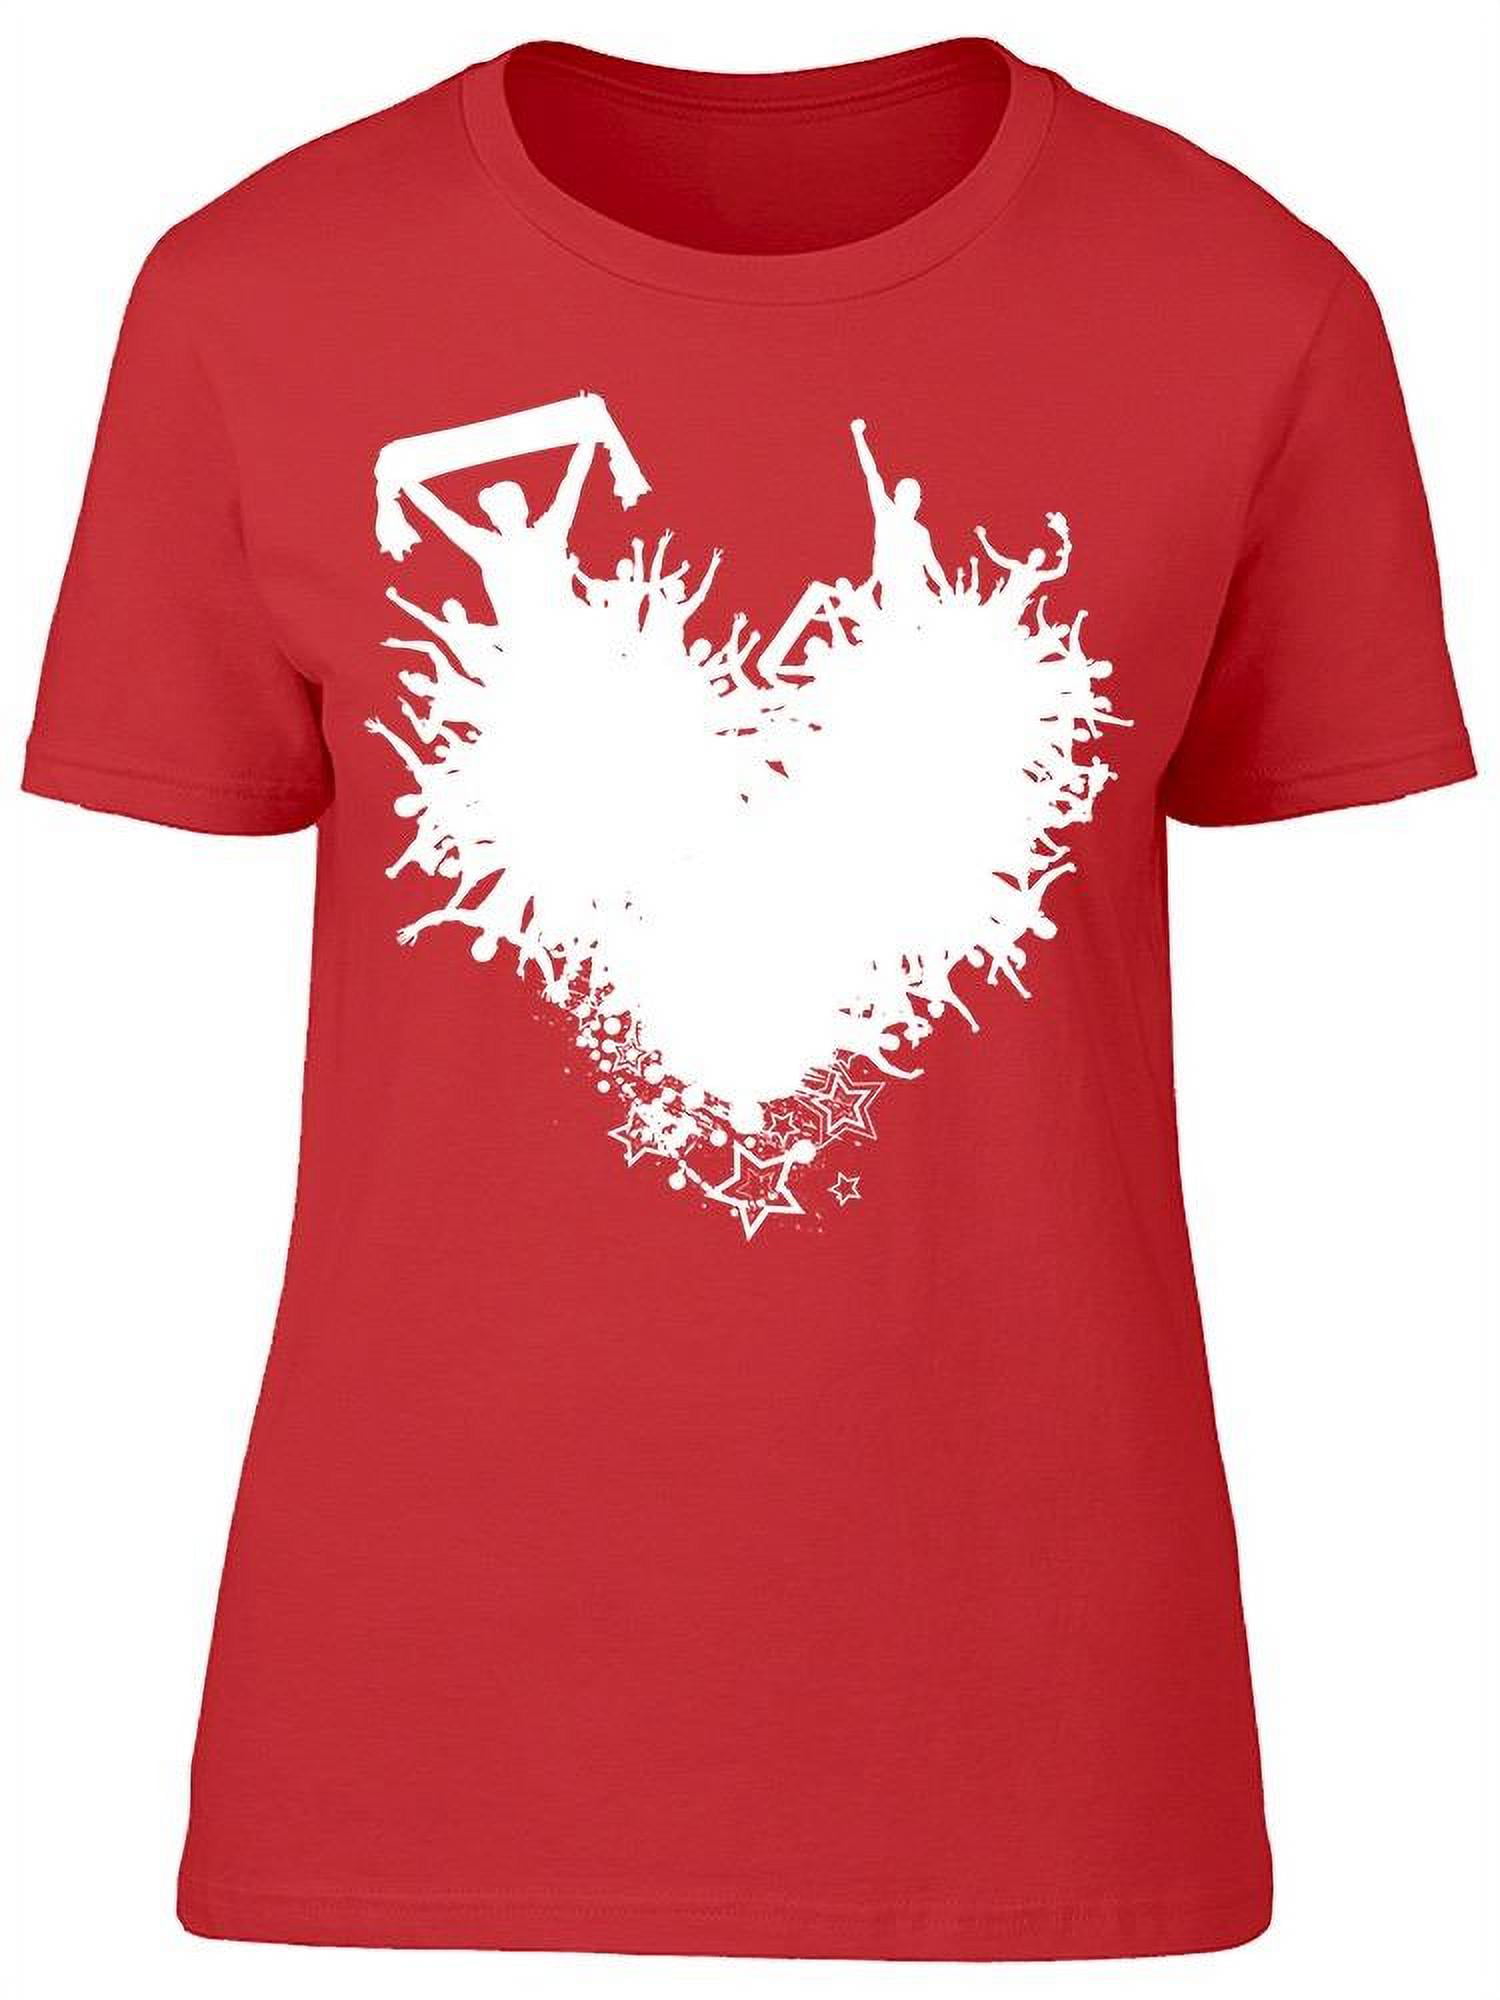 Lime Green and Neon Pink Heart to Cheer Shirt 